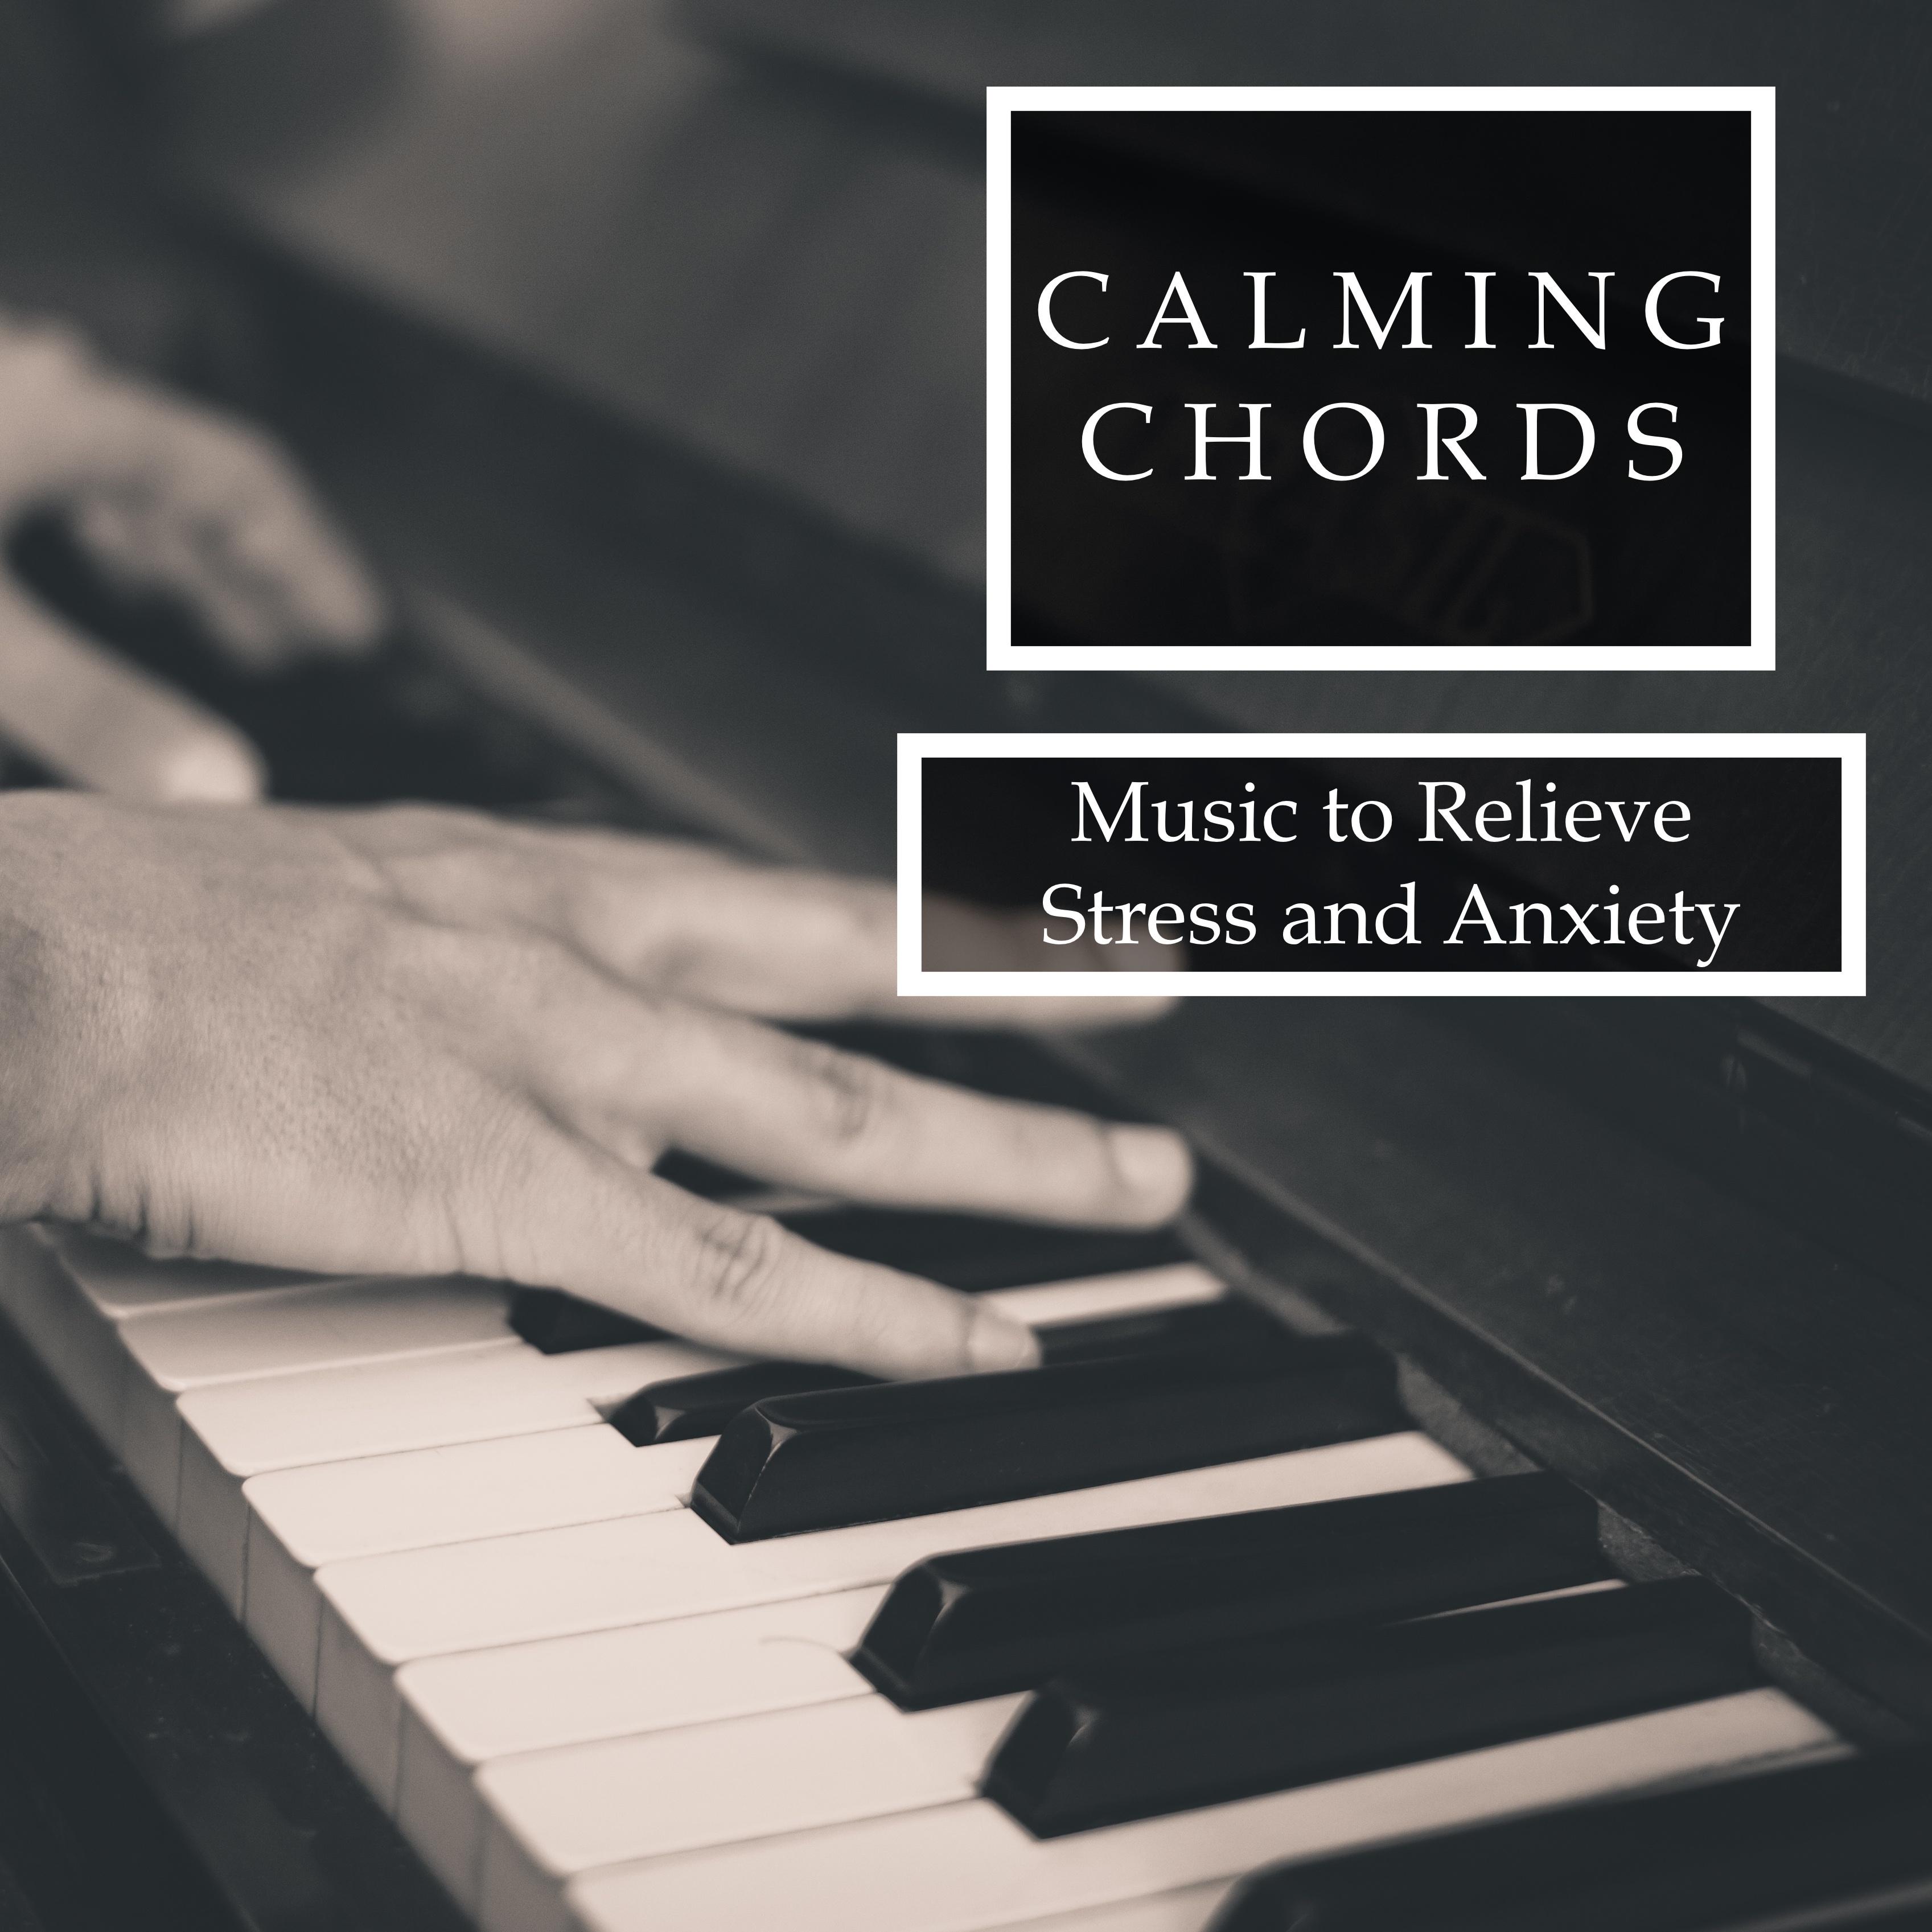 Calming Chords - Piano Relaxation and Pure Tranquility to Relieve Stress and Anxiety